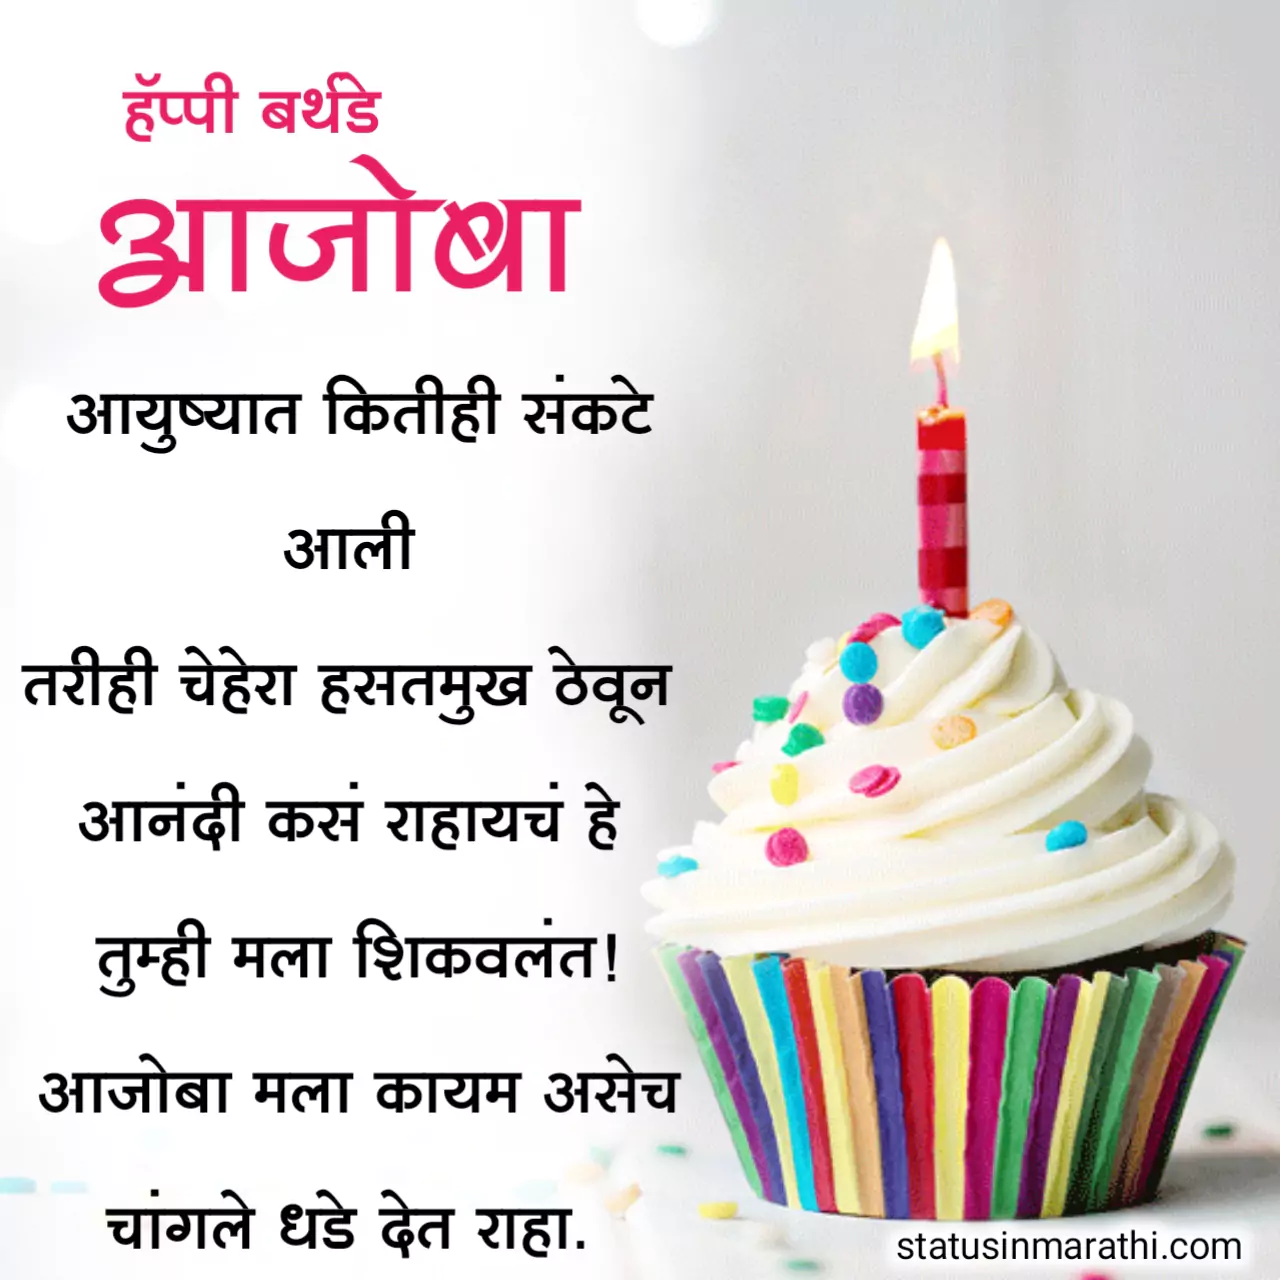 Happy Birthday wishes for grandfather in marathi